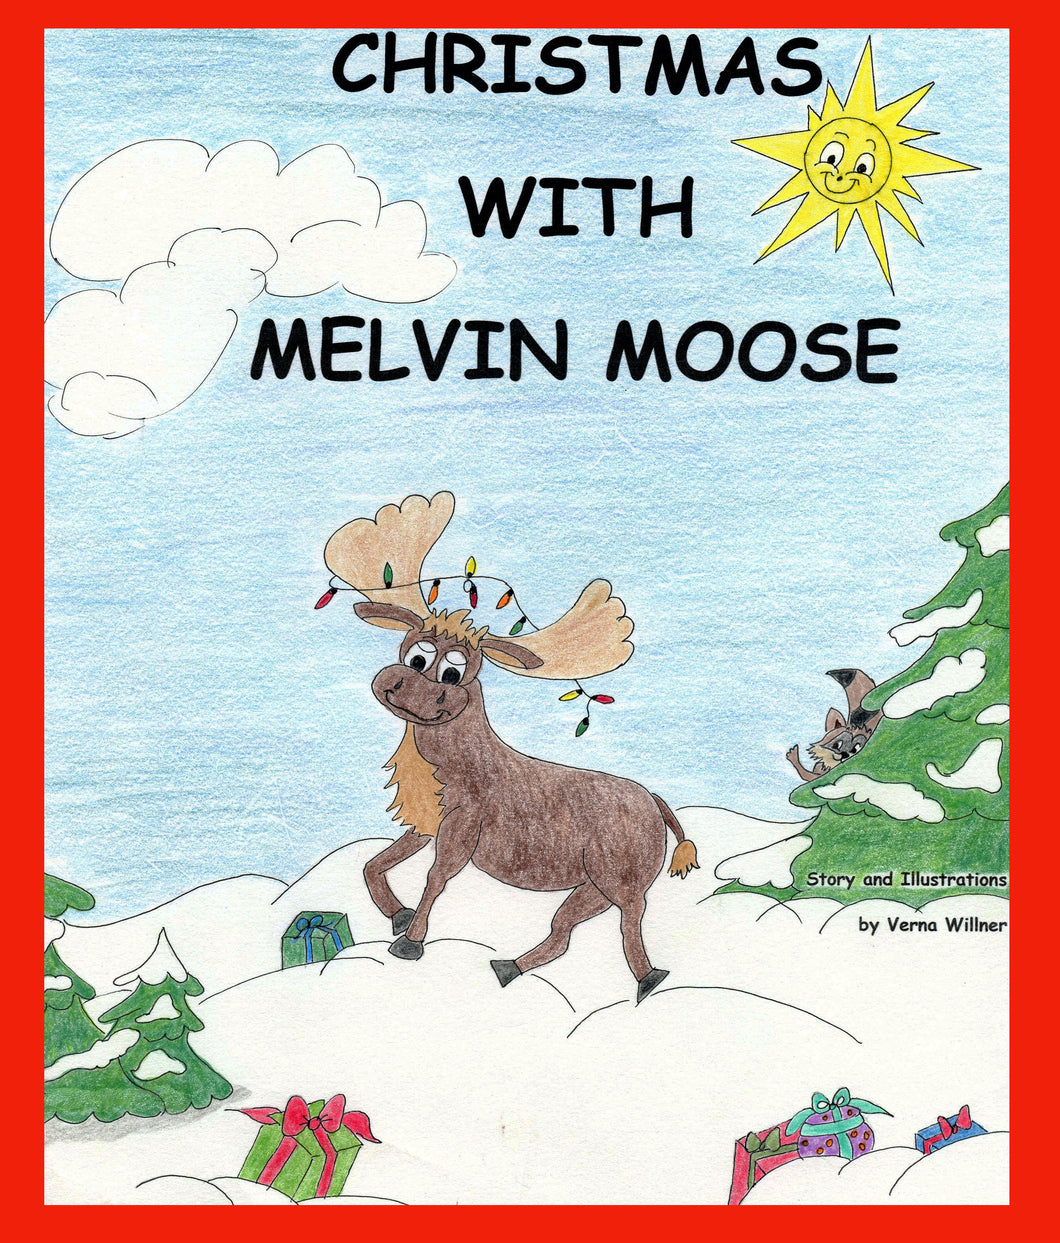 Christmas with Melvin Moose